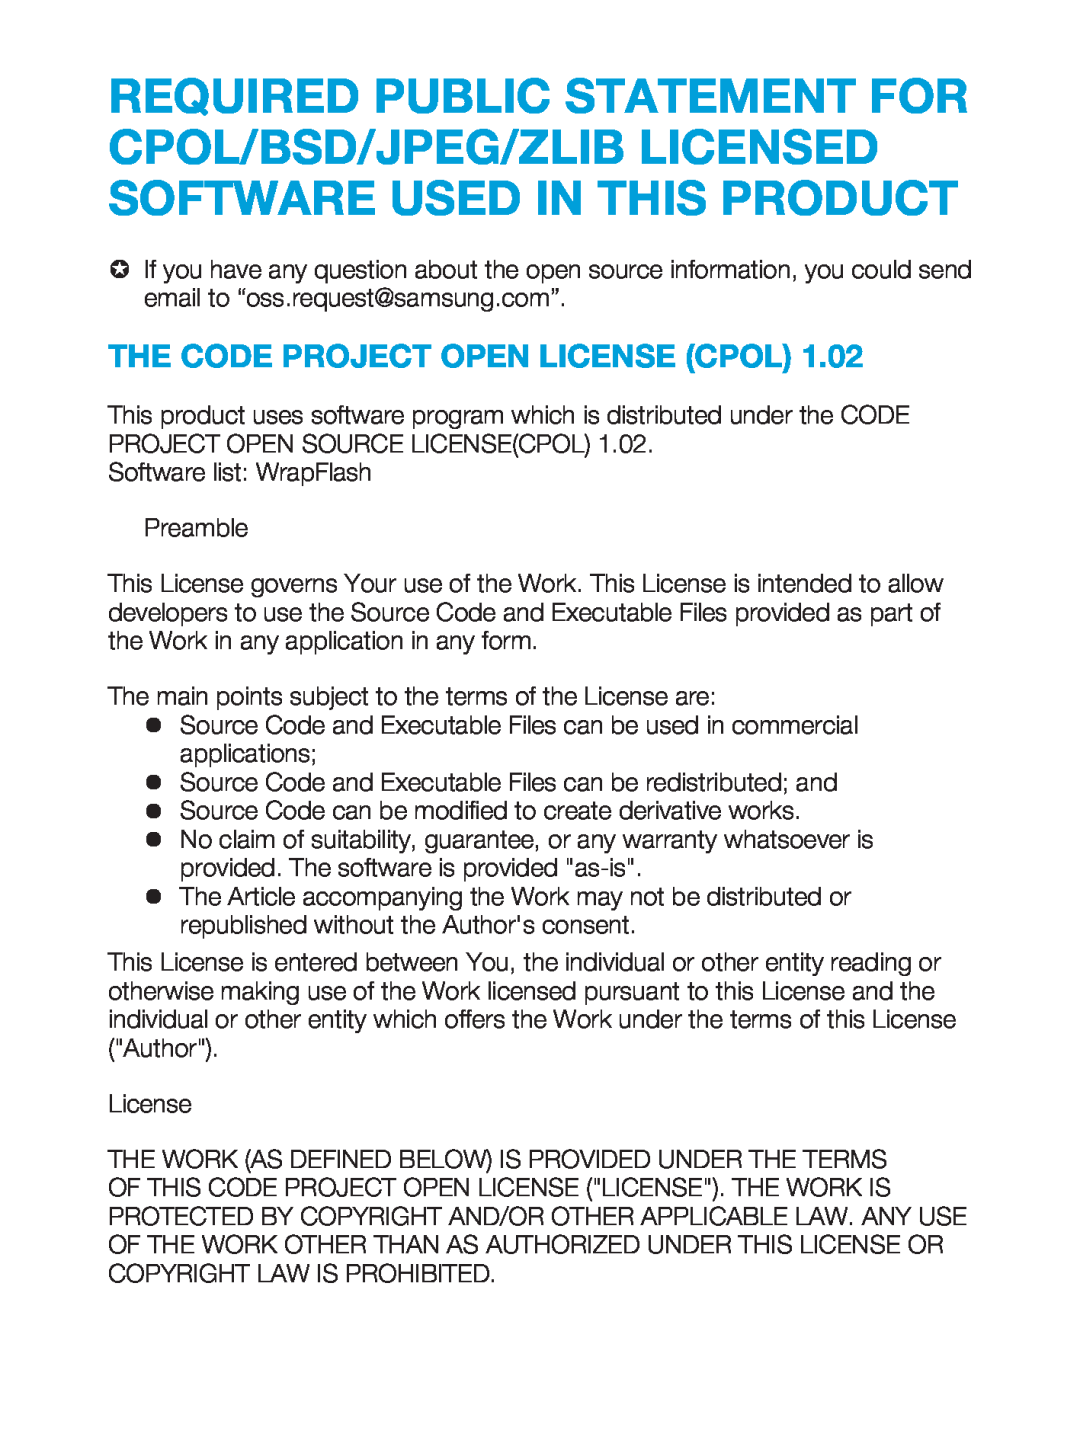 THE CODE PROJECT OPEN LICENSE (CPOL) Hand Held Camcorder HMX-M20BN